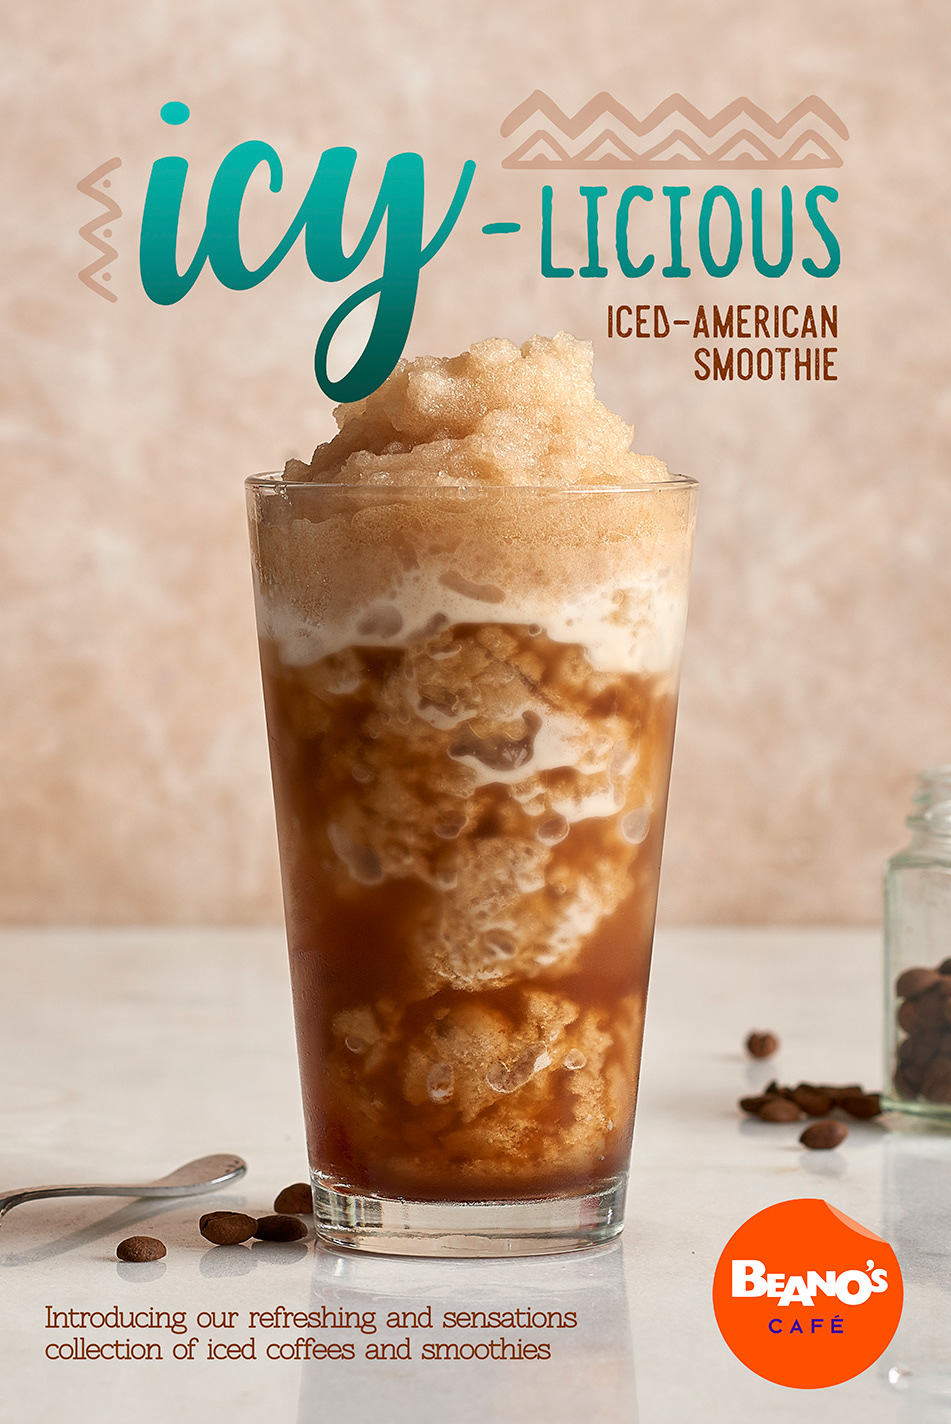 food styling drinks iced coffee cokctails Photography  Advertising  menu cafe